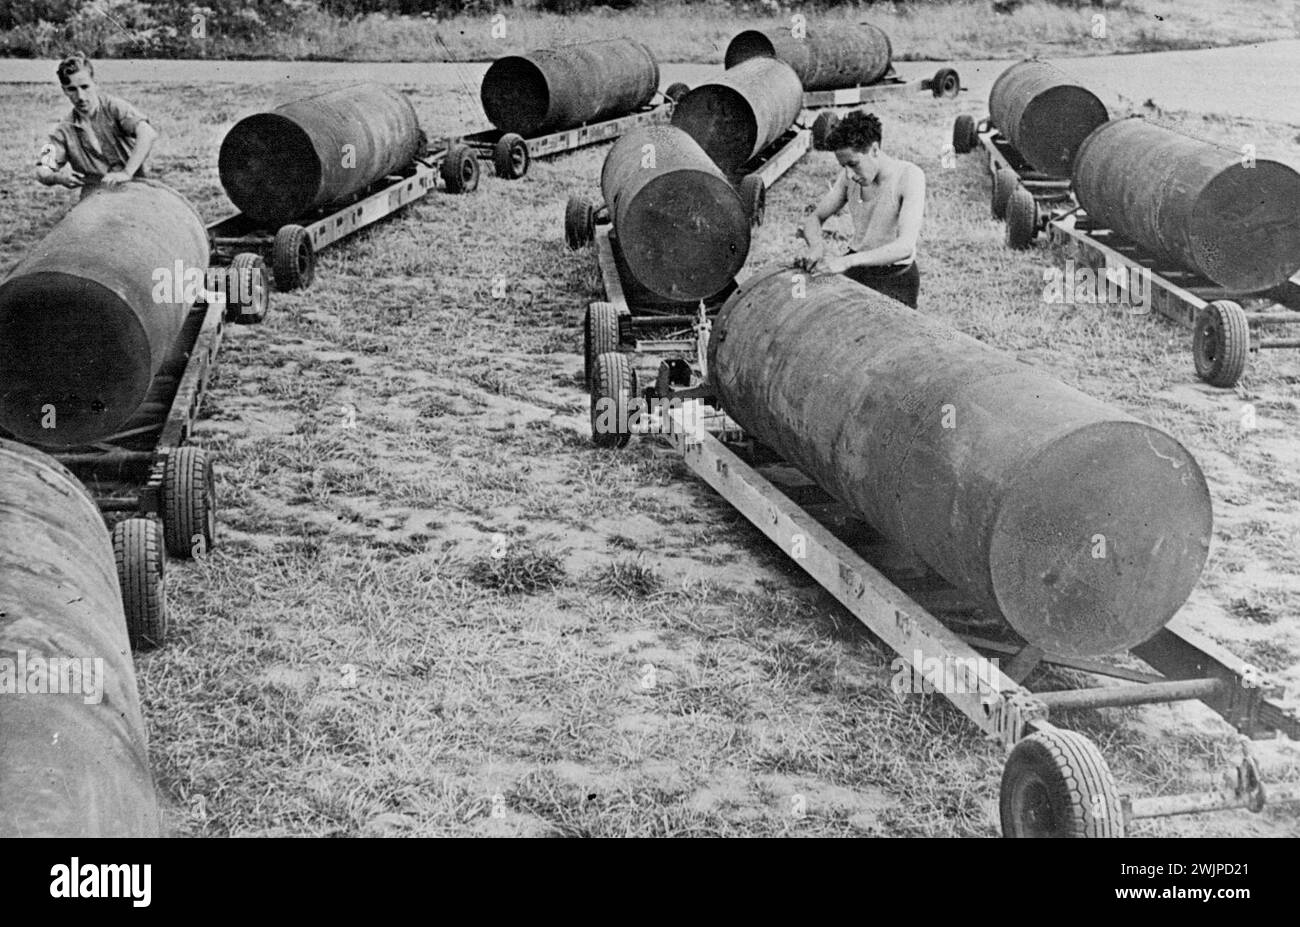 The R.S.F.'S Four Thousand Pound Bomb. -- A line-up of 4,000lb. bombs waiting to be unloaded on to Lancaster bombers. First official photographs of the R.A.F.'s 8,000lb and 4,000lb. bombs, are now released. Their weight has been felt with devastating effect on enemy targets in Italy and Germany. November 1, 1943. (Photo by Department Of Information, Commonwealth of Australia). Stock Photo